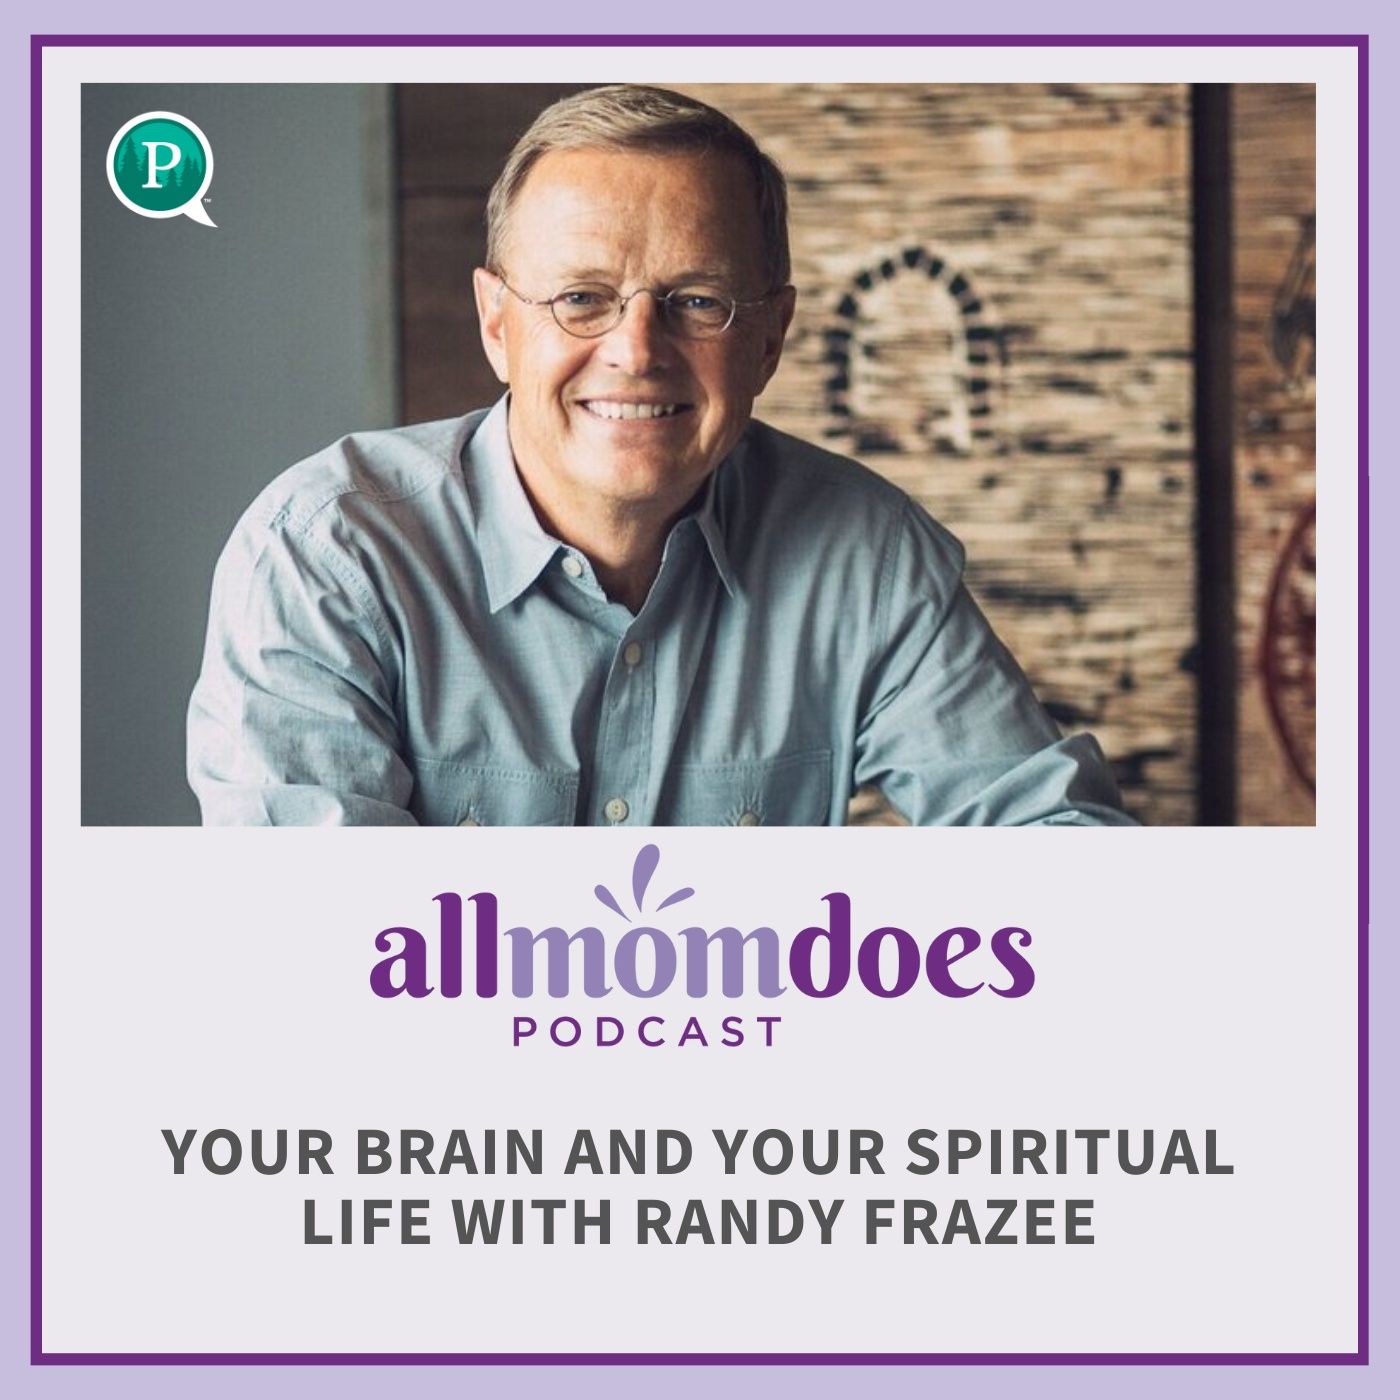 Your Brain and Your Spiritual Life with Randy Frazee